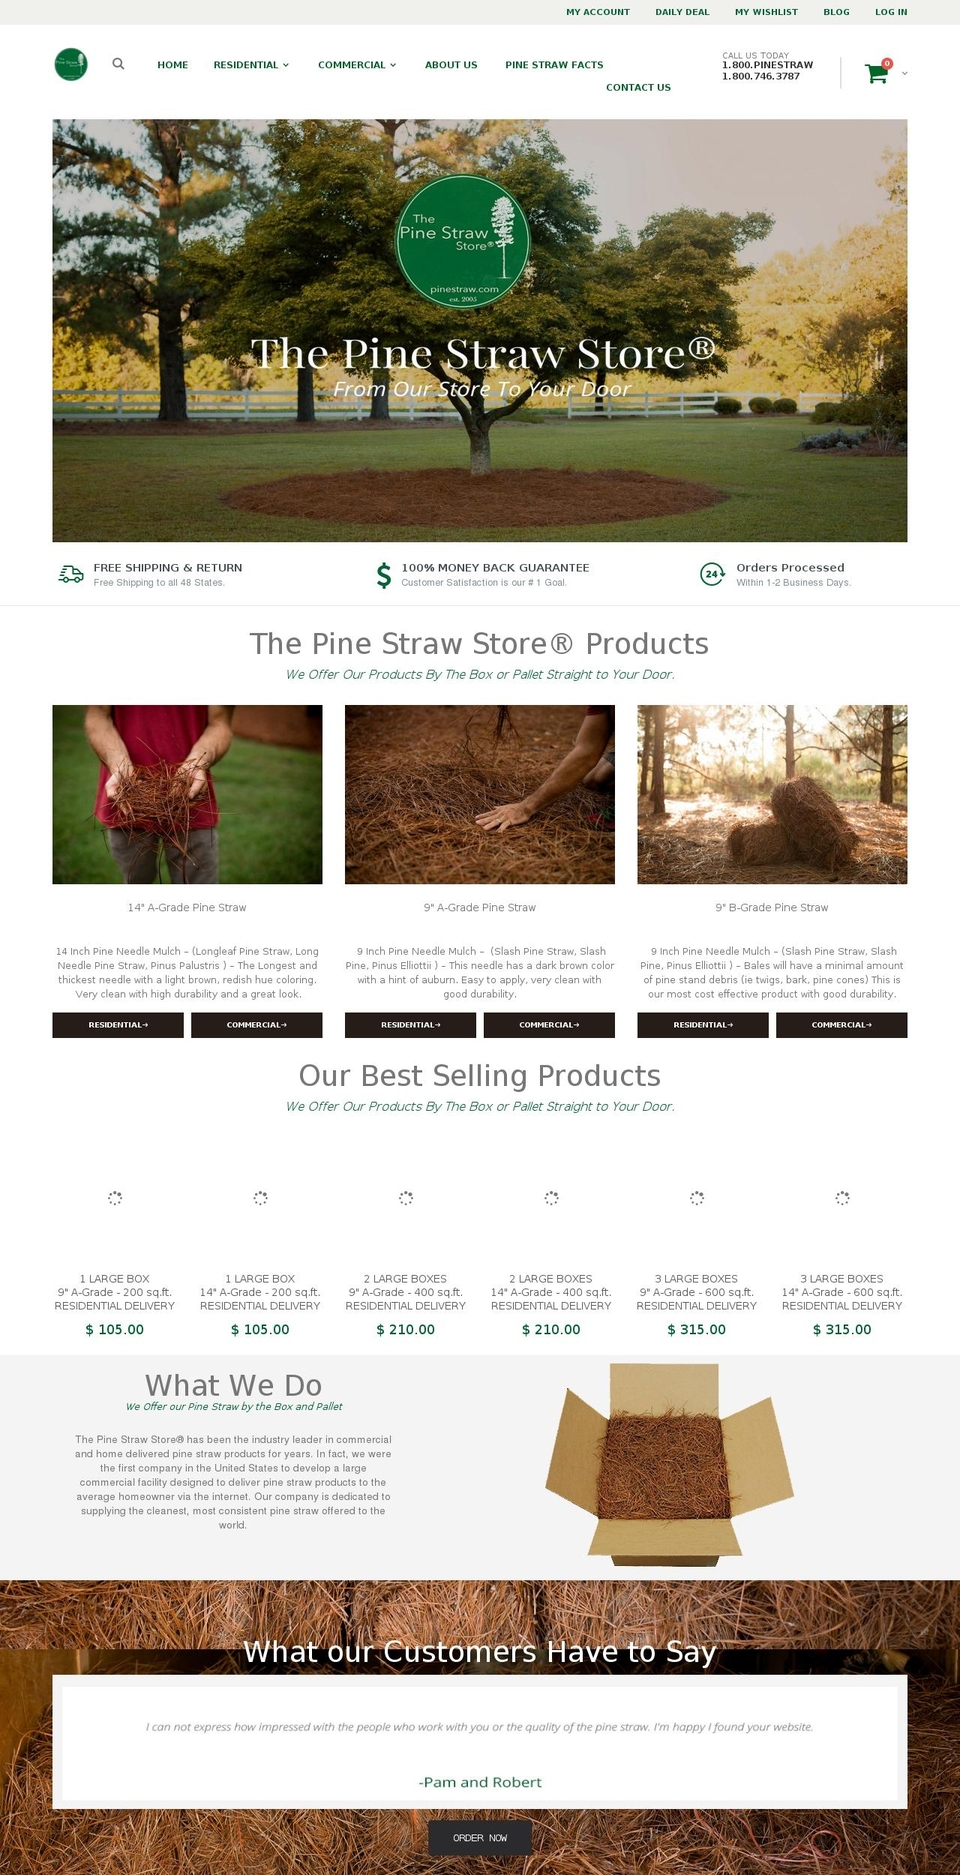 The Pine Straw Store Shopify theme site example orderpinestraw.com